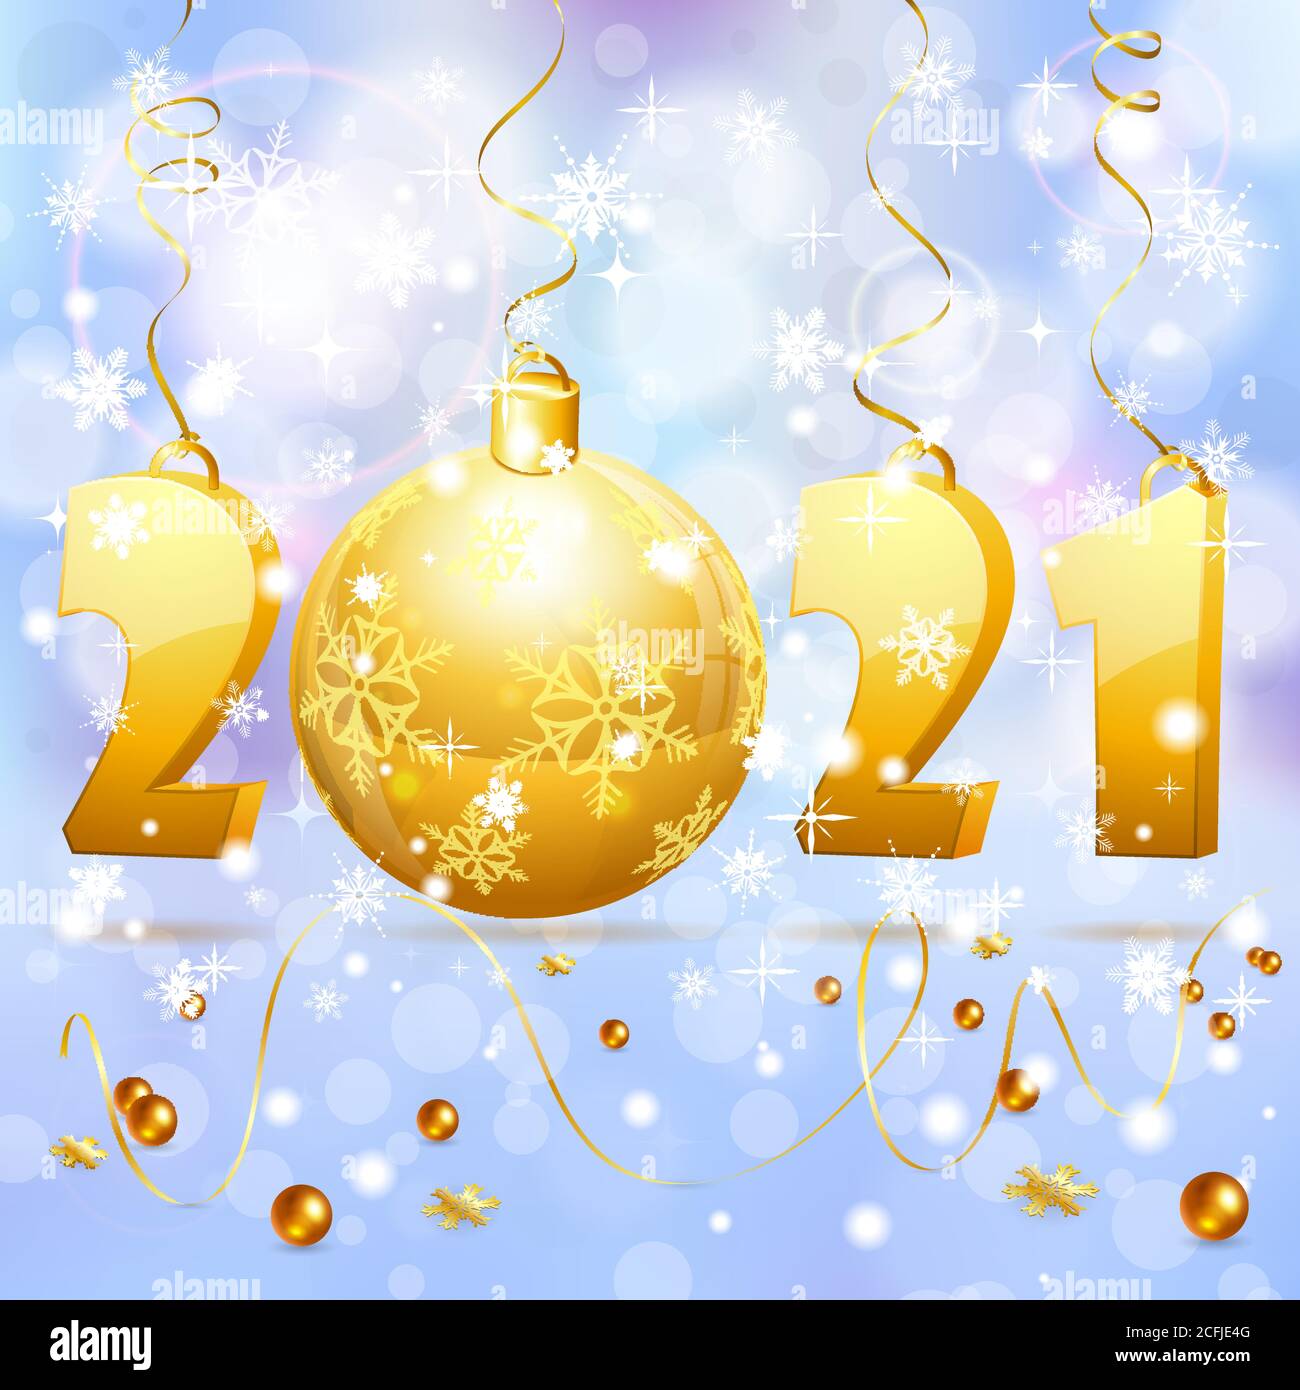 Christmas and New Year background Stock Vector